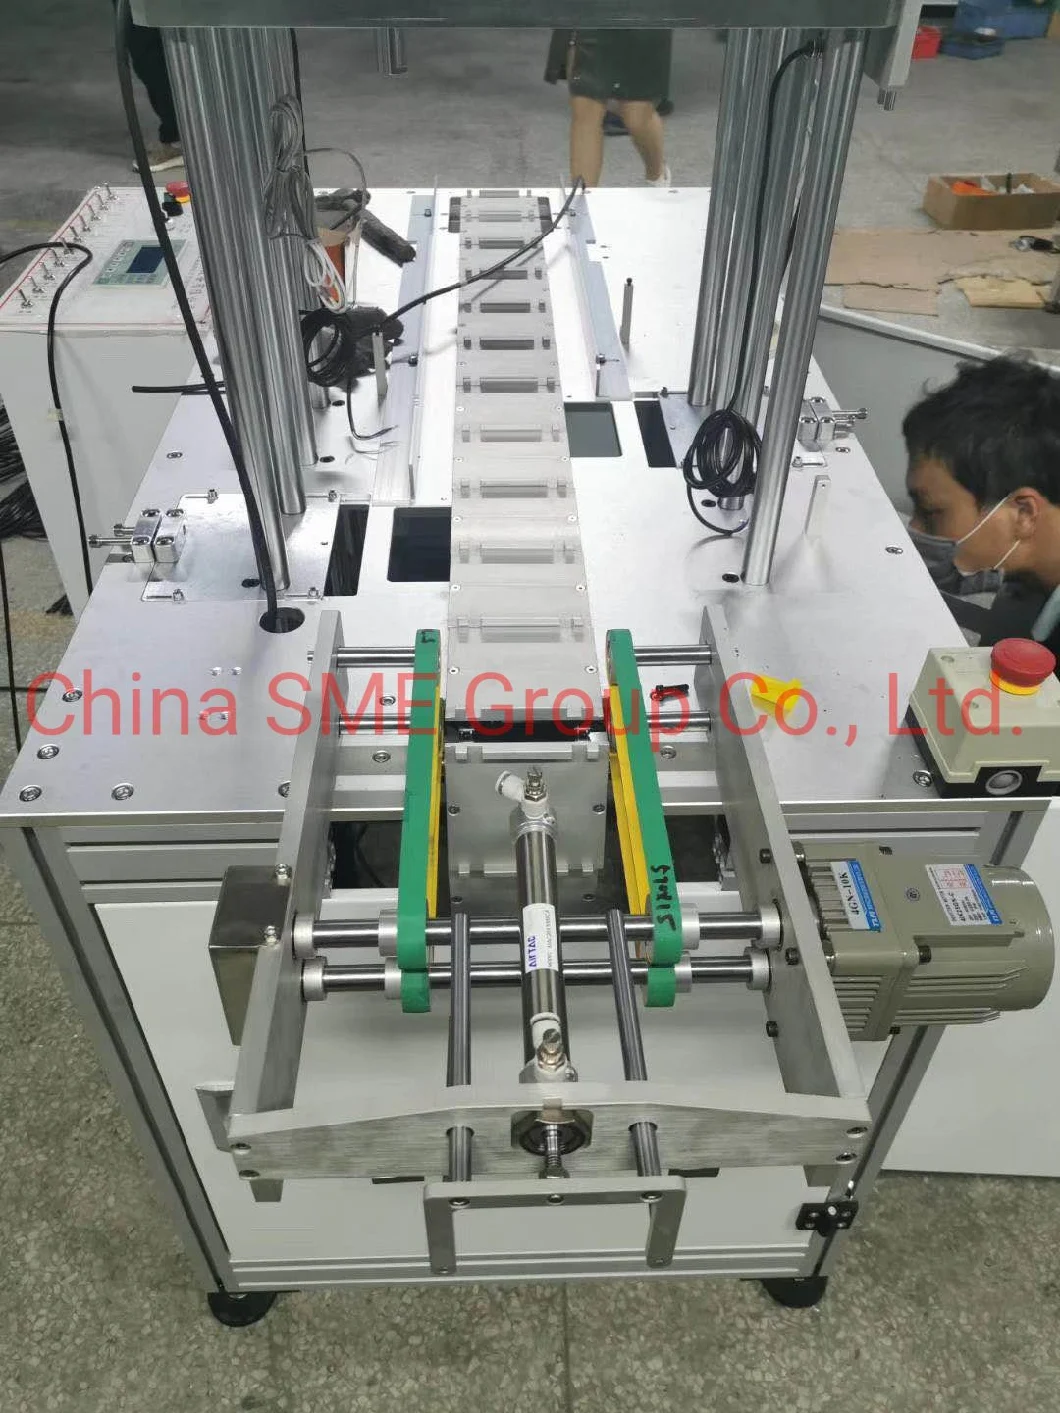 Fully Automatic Production Line Desired for Kn95 Mask Production